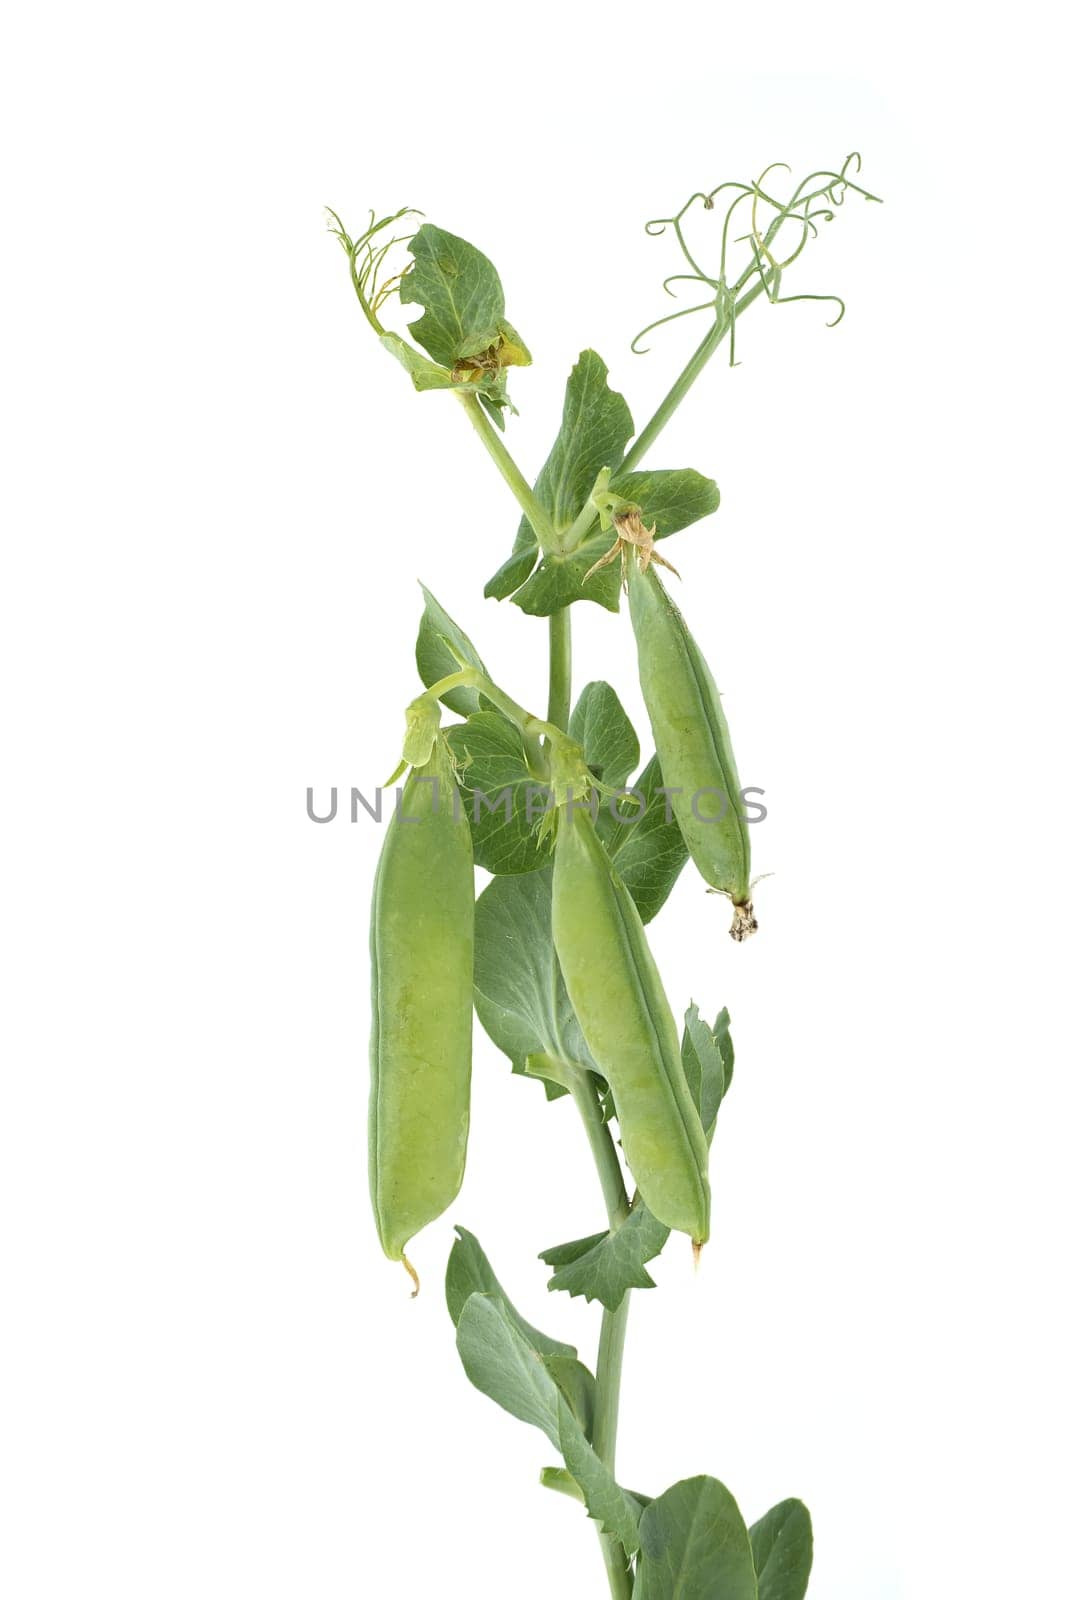 Fresh garden peas plant with pods isolated on a white background, sweet peas or English peas